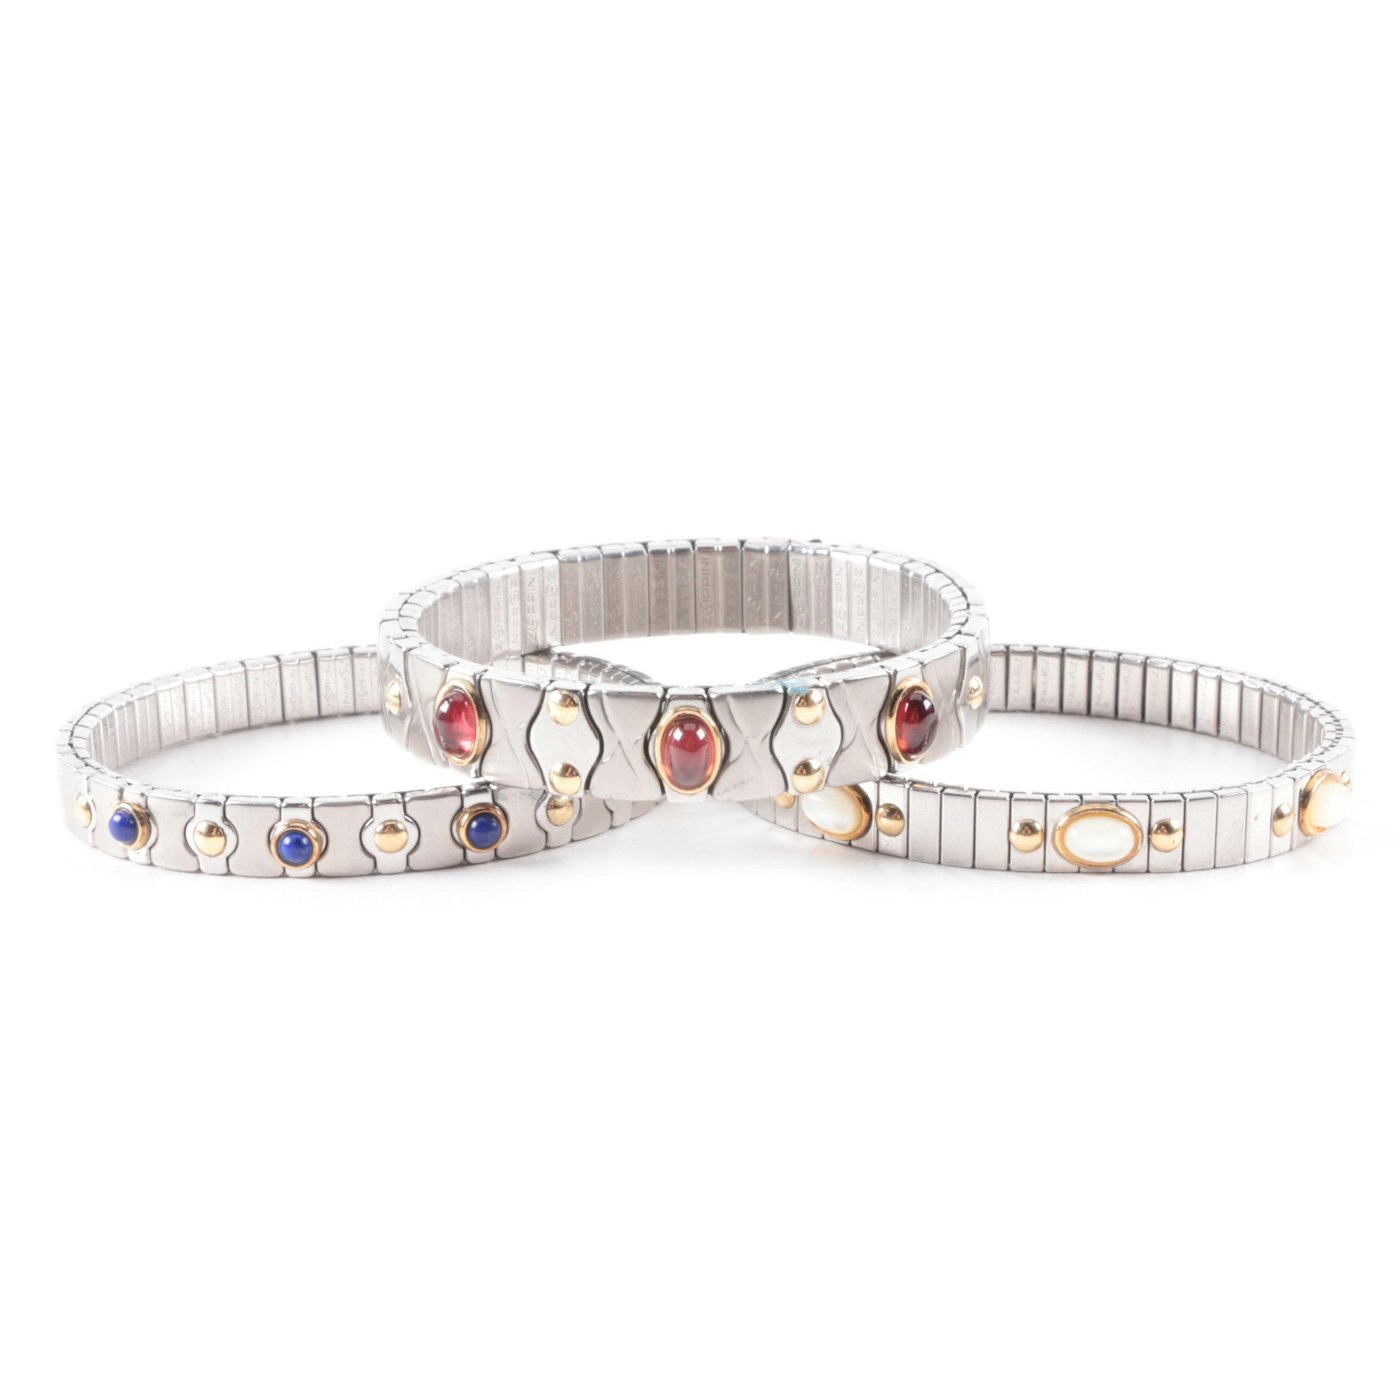 Zoppini Stainless Steel and 18K Gold Expansion Bracelets With Gemstones ...